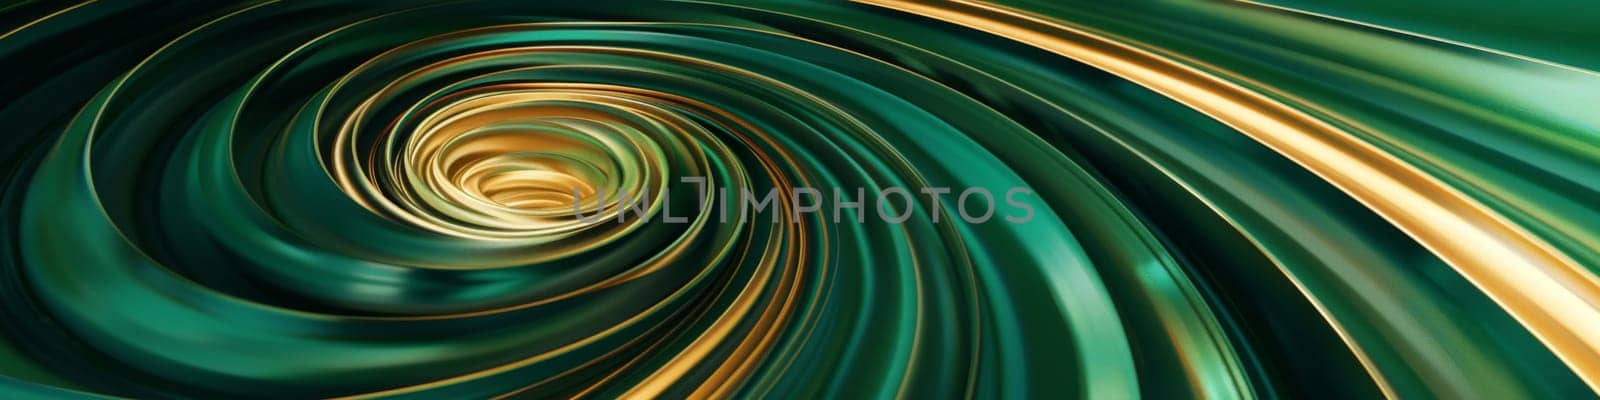 Abstract spiral background with green and gold color as background or texture by Kadula